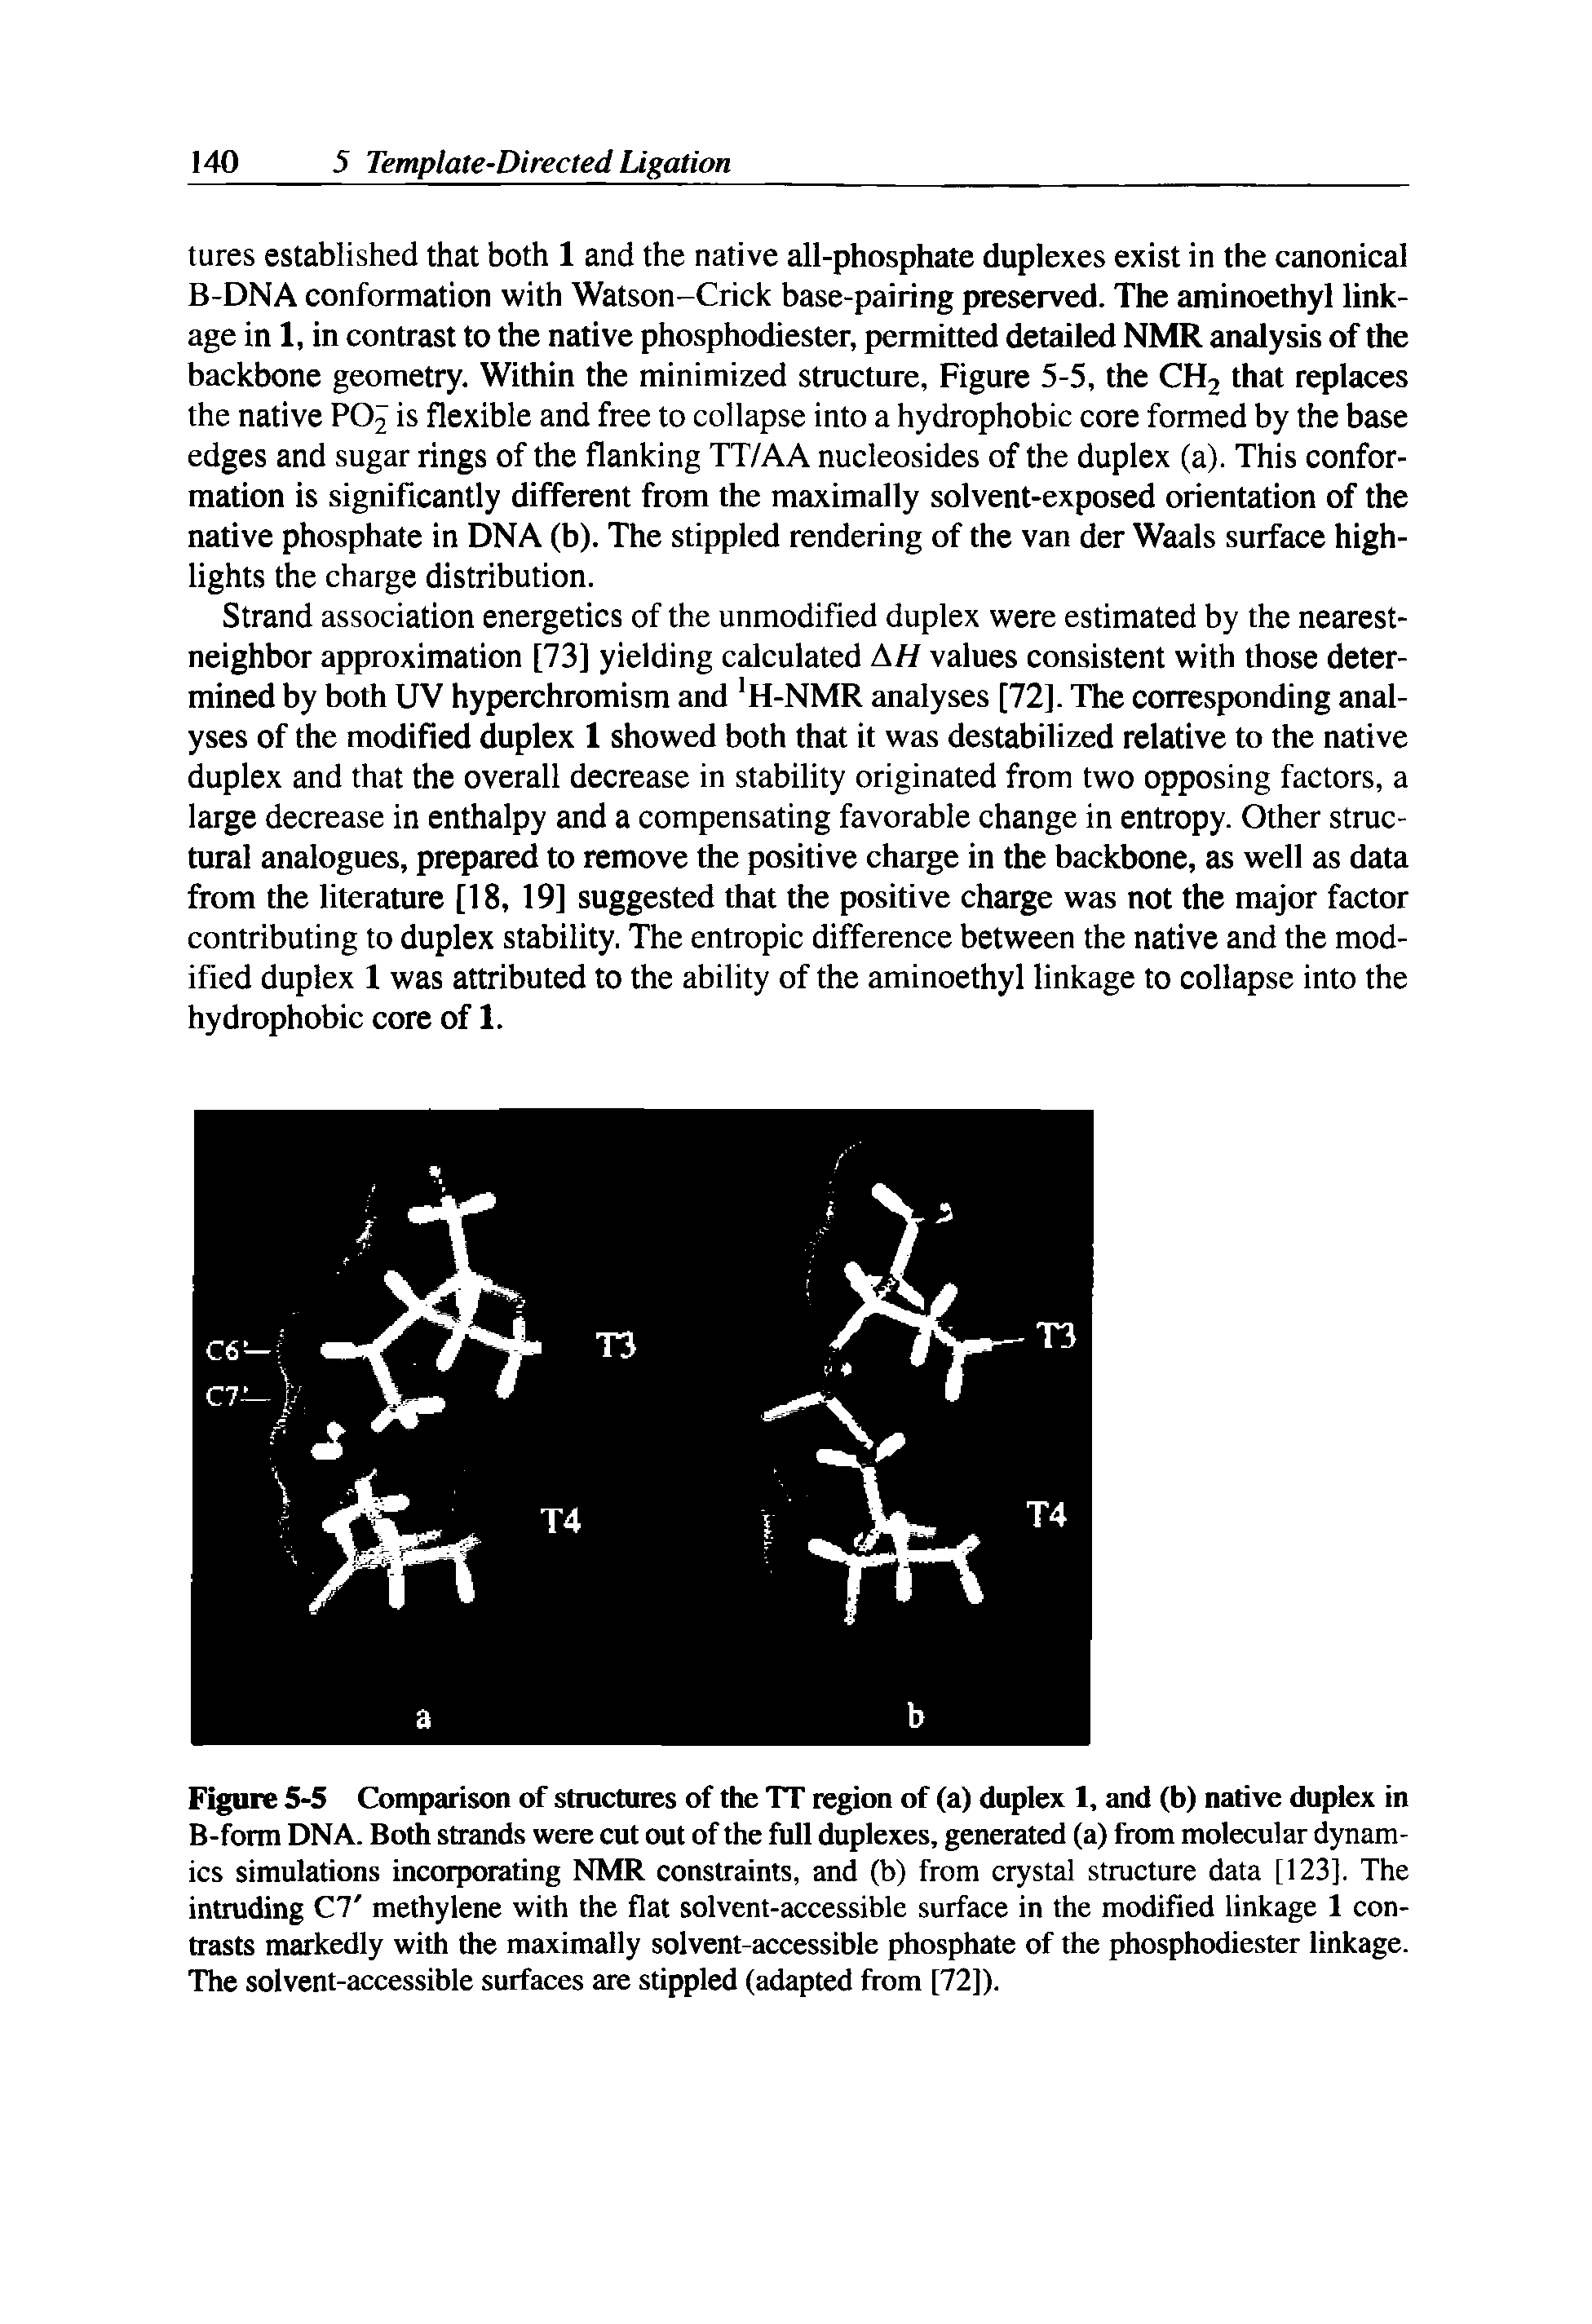 Figure 5-5 Comparison of structures of the TT region of (a) duplex 1, and (b) native duplex in B-form DNA. Both strands were cut out of the full duplexes, generated (a) from molecular dynamics simulations incorporating NMR constraints, and (b) from crystal structure data [123], The intruding C7 methylene with the flat solvent-accessible surface in the modified linkage 1 contrasts markedly with the maximally solvent-accessible phosphate of the phosphodiester linkage. The solvent-accessible surfaces are stippled (adapted from [72]).